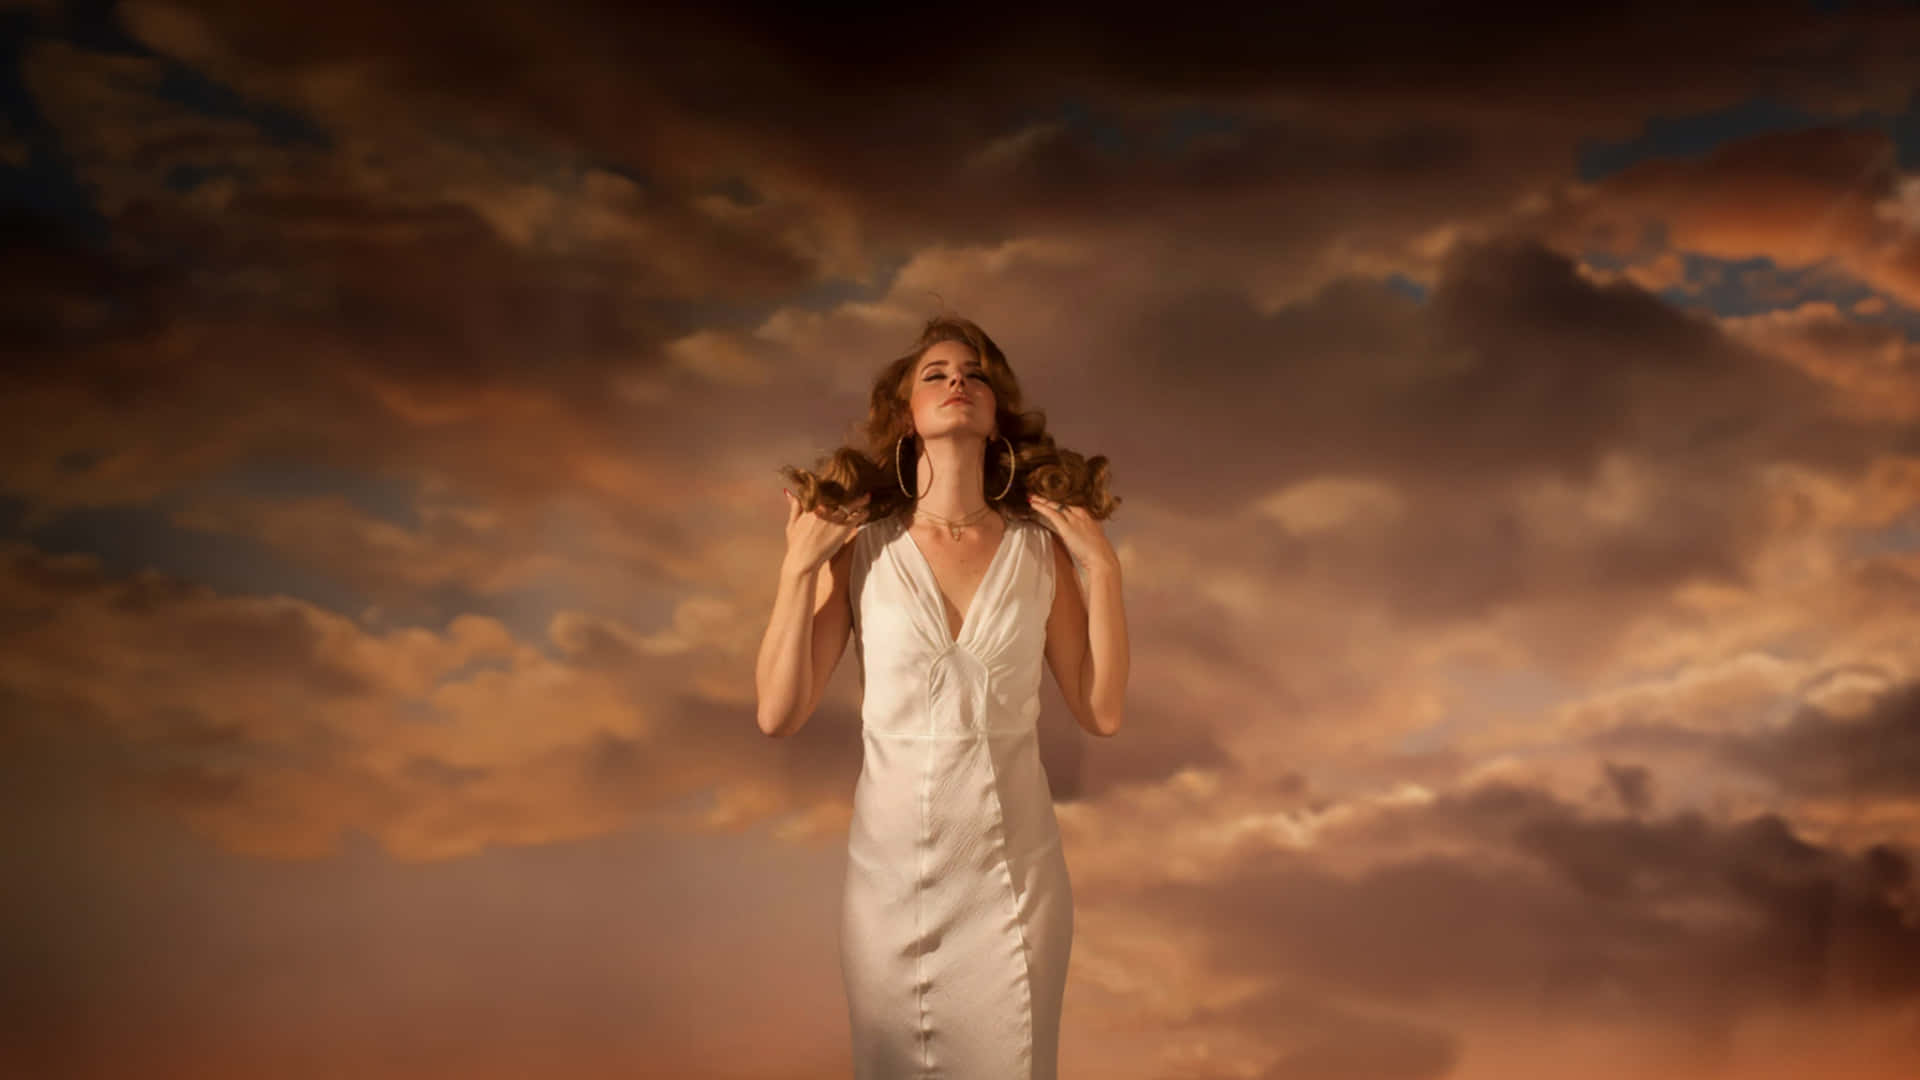 Ethereal Woman Cloudy Sky Wallpaper